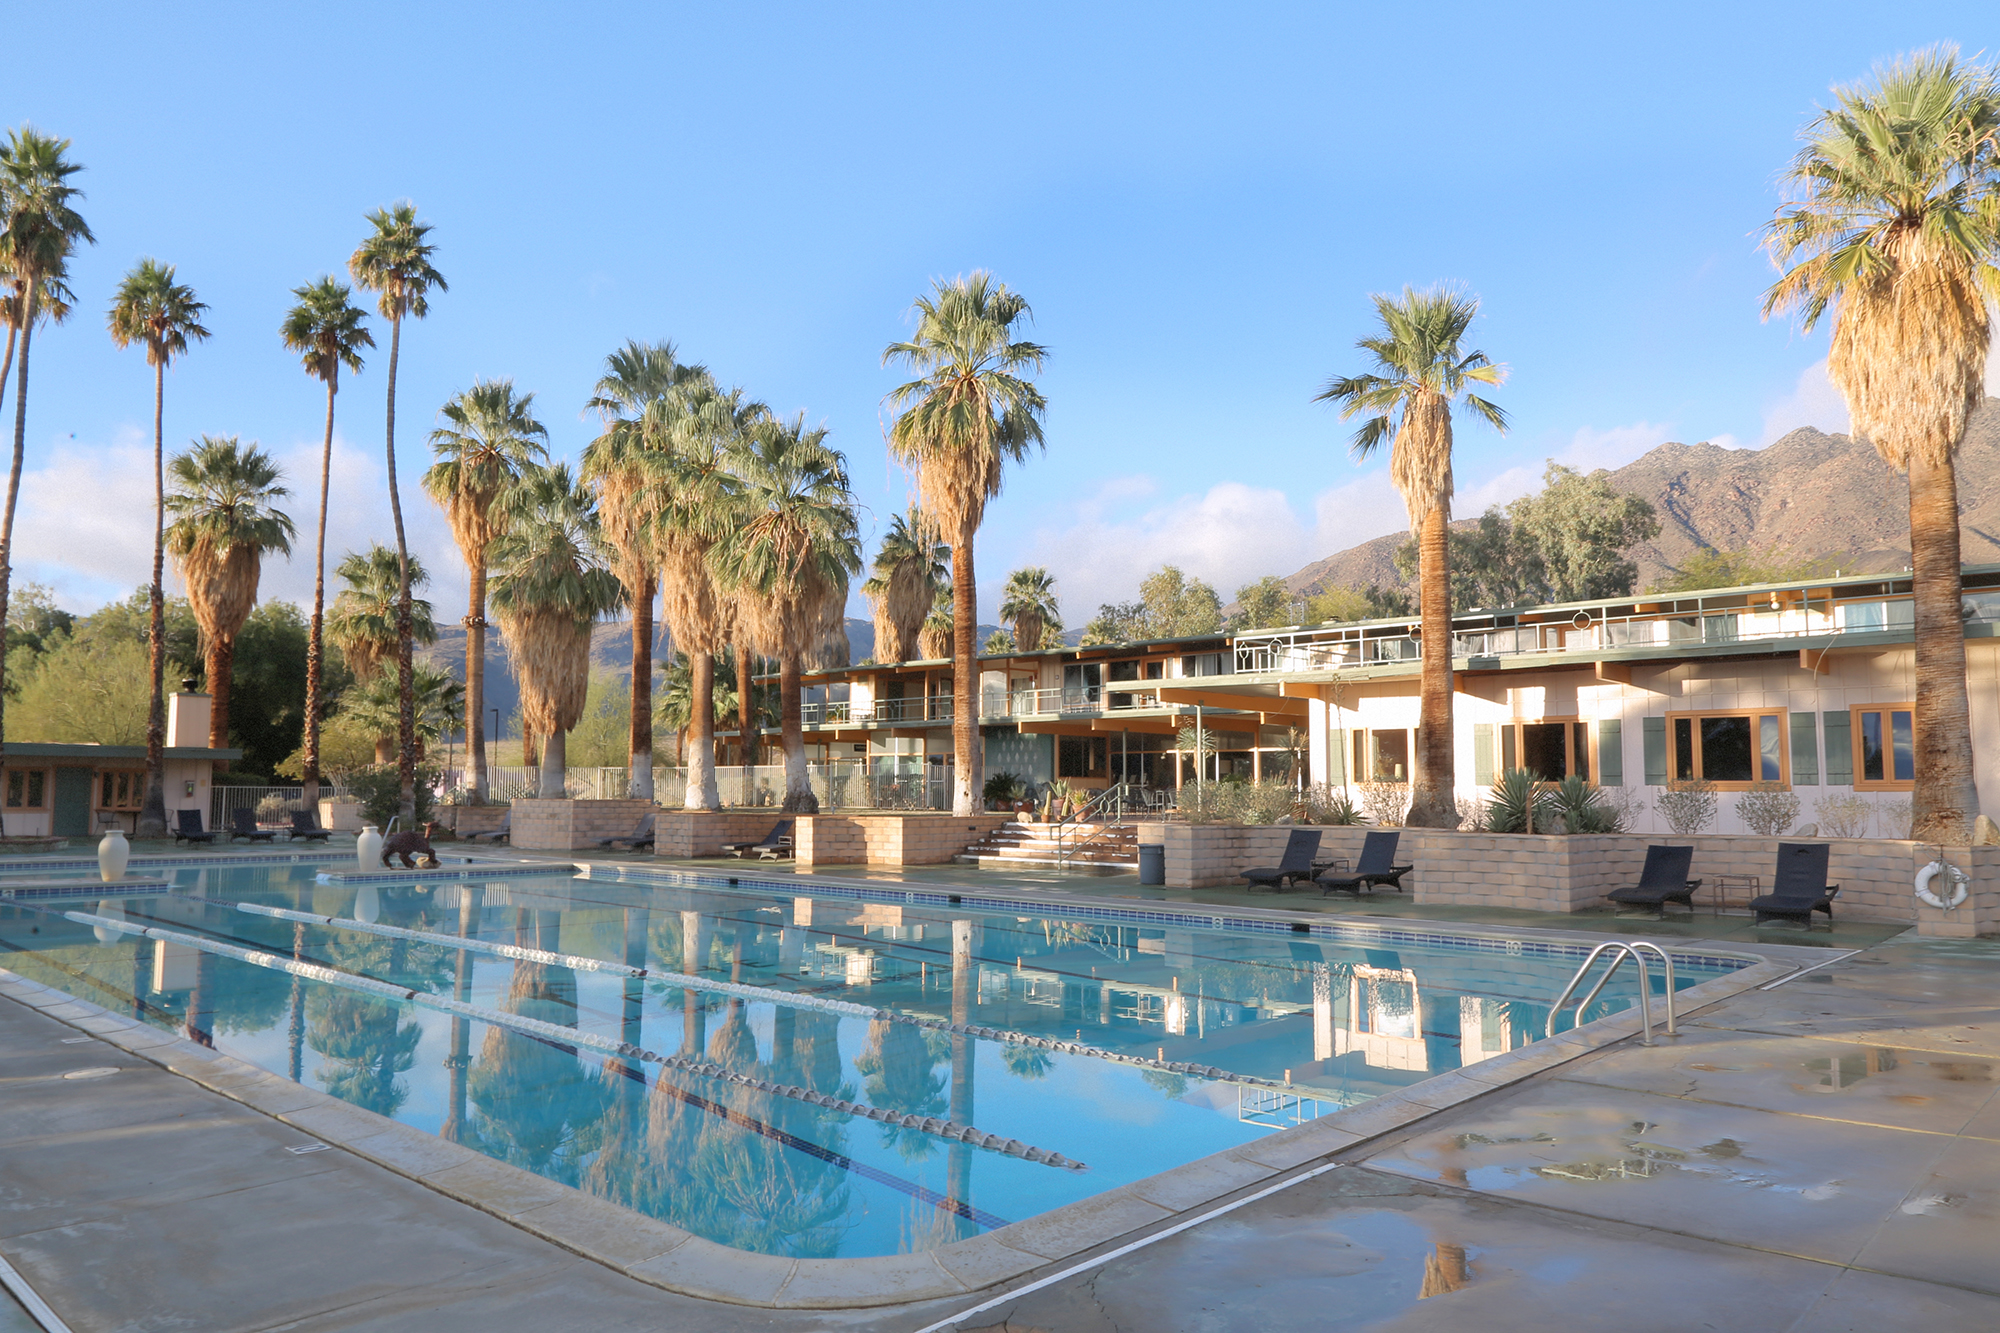 The pool at the Palms at Indian Head Hotel in Borrego Springs, California.